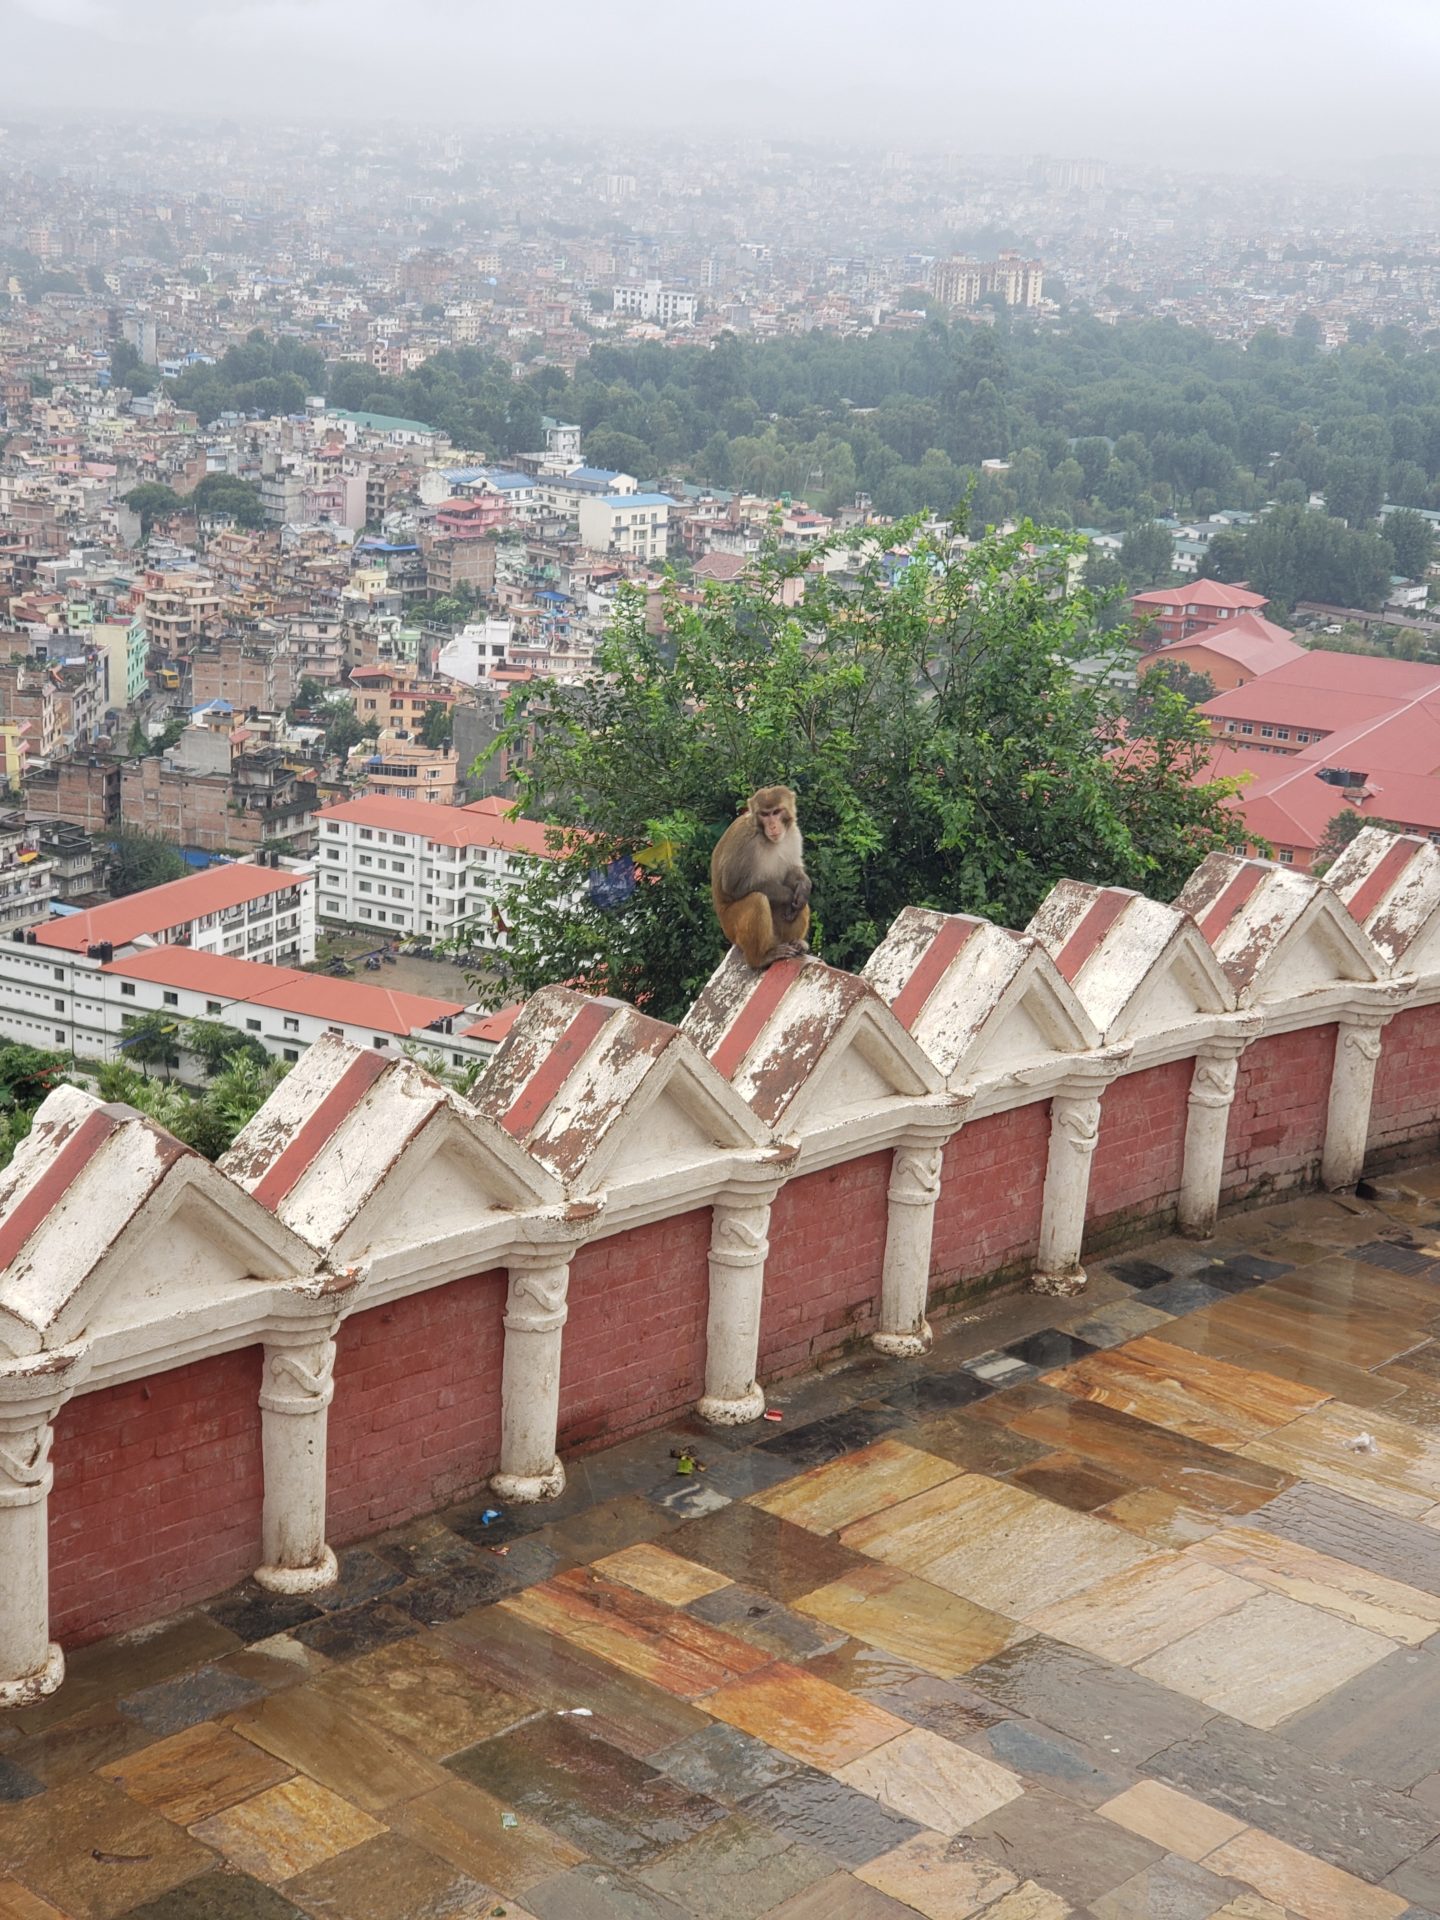 a monkey sitting on a wall with a city in the background